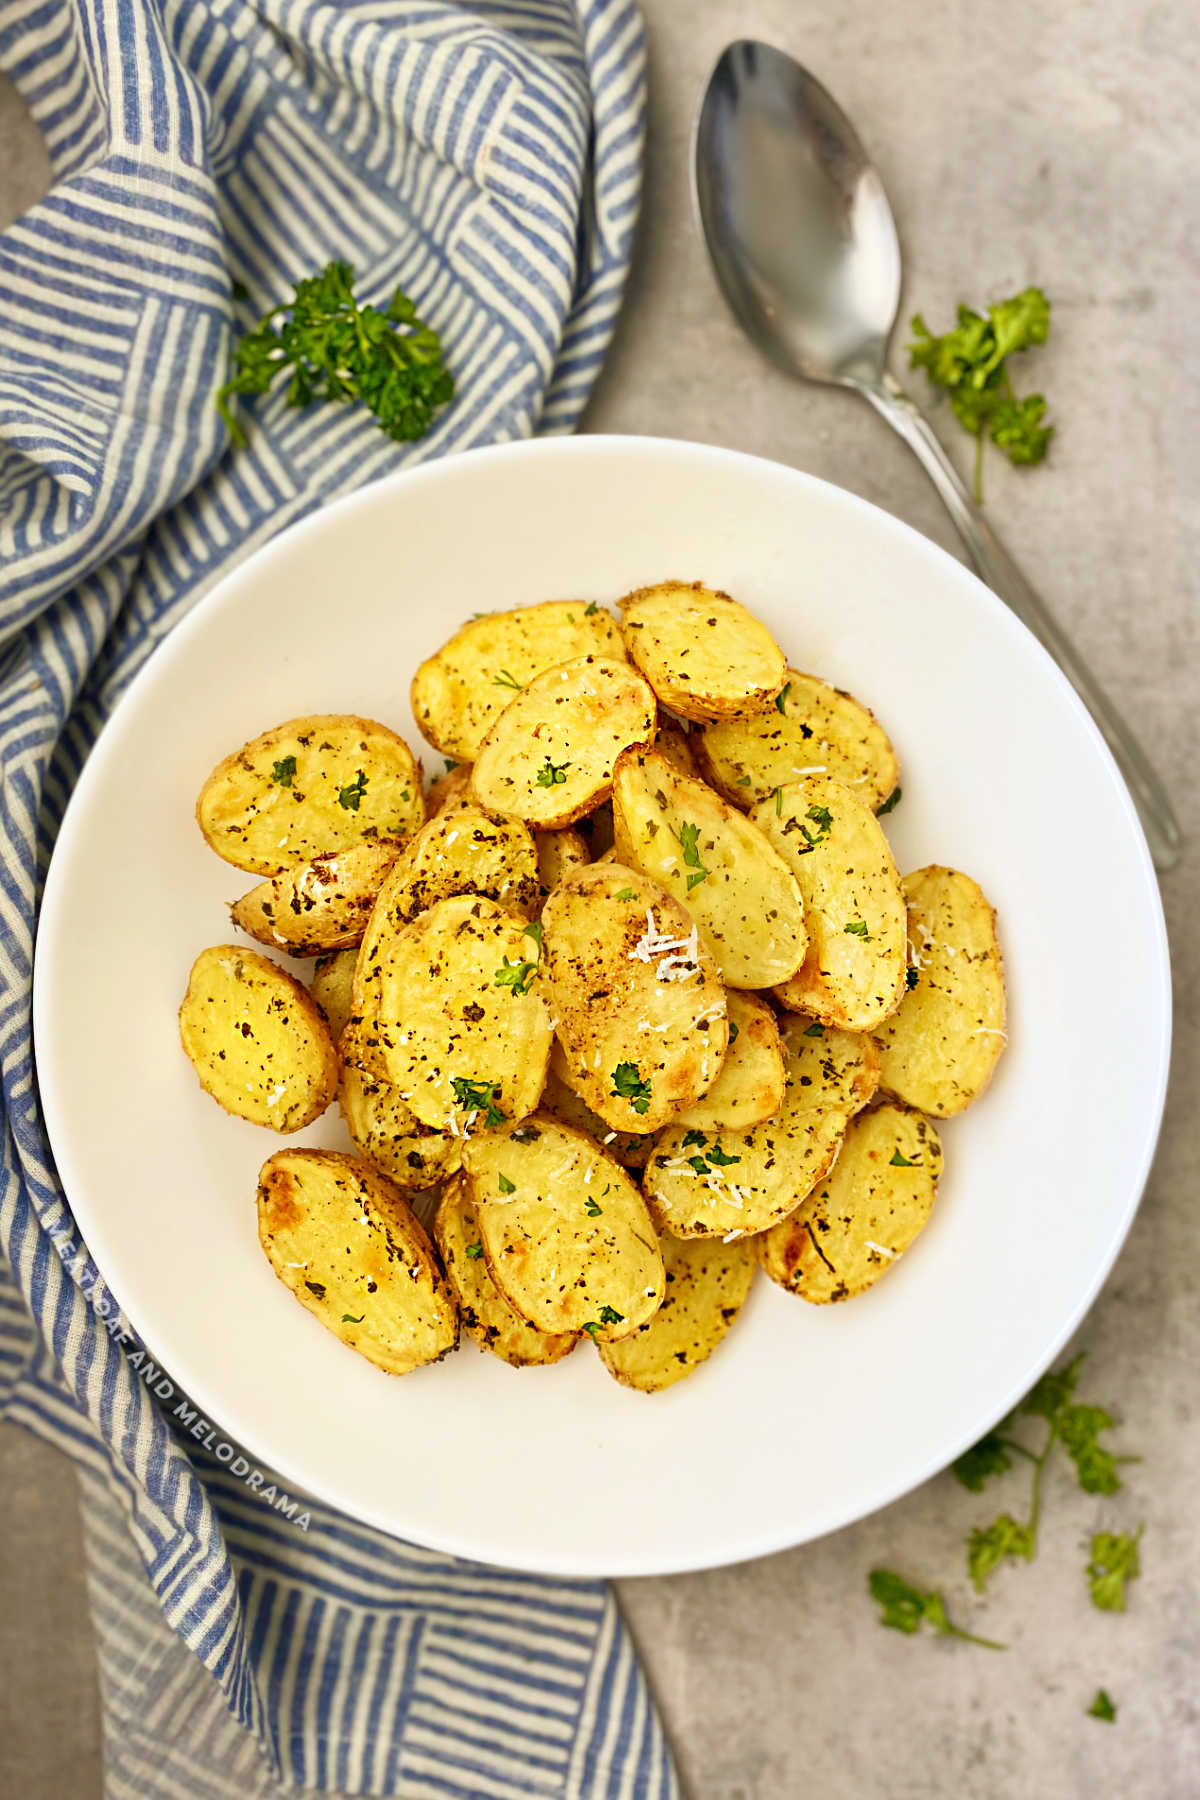 Easy Baby Potato Fry To Make at Home, Serve as Side Dish Or Snacks